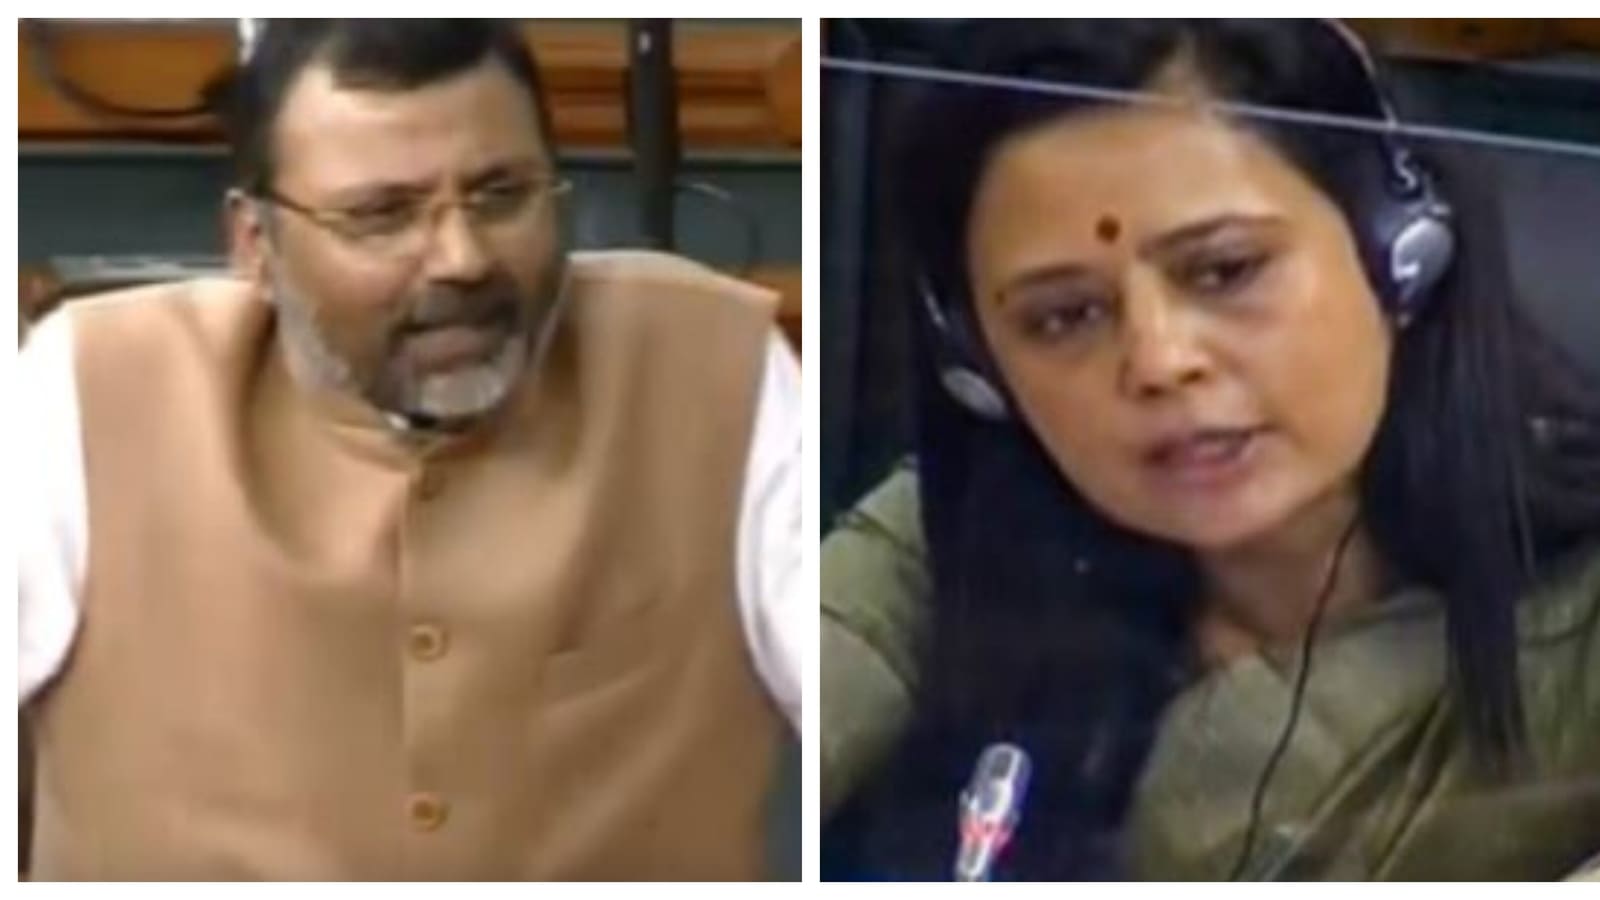 Mahua Moitra asks questions in Parliament in exchange for money and gifts  from businessman Darshan Hiranandani, alleges Nishikant Dubey :  r/IndiaSpeaks